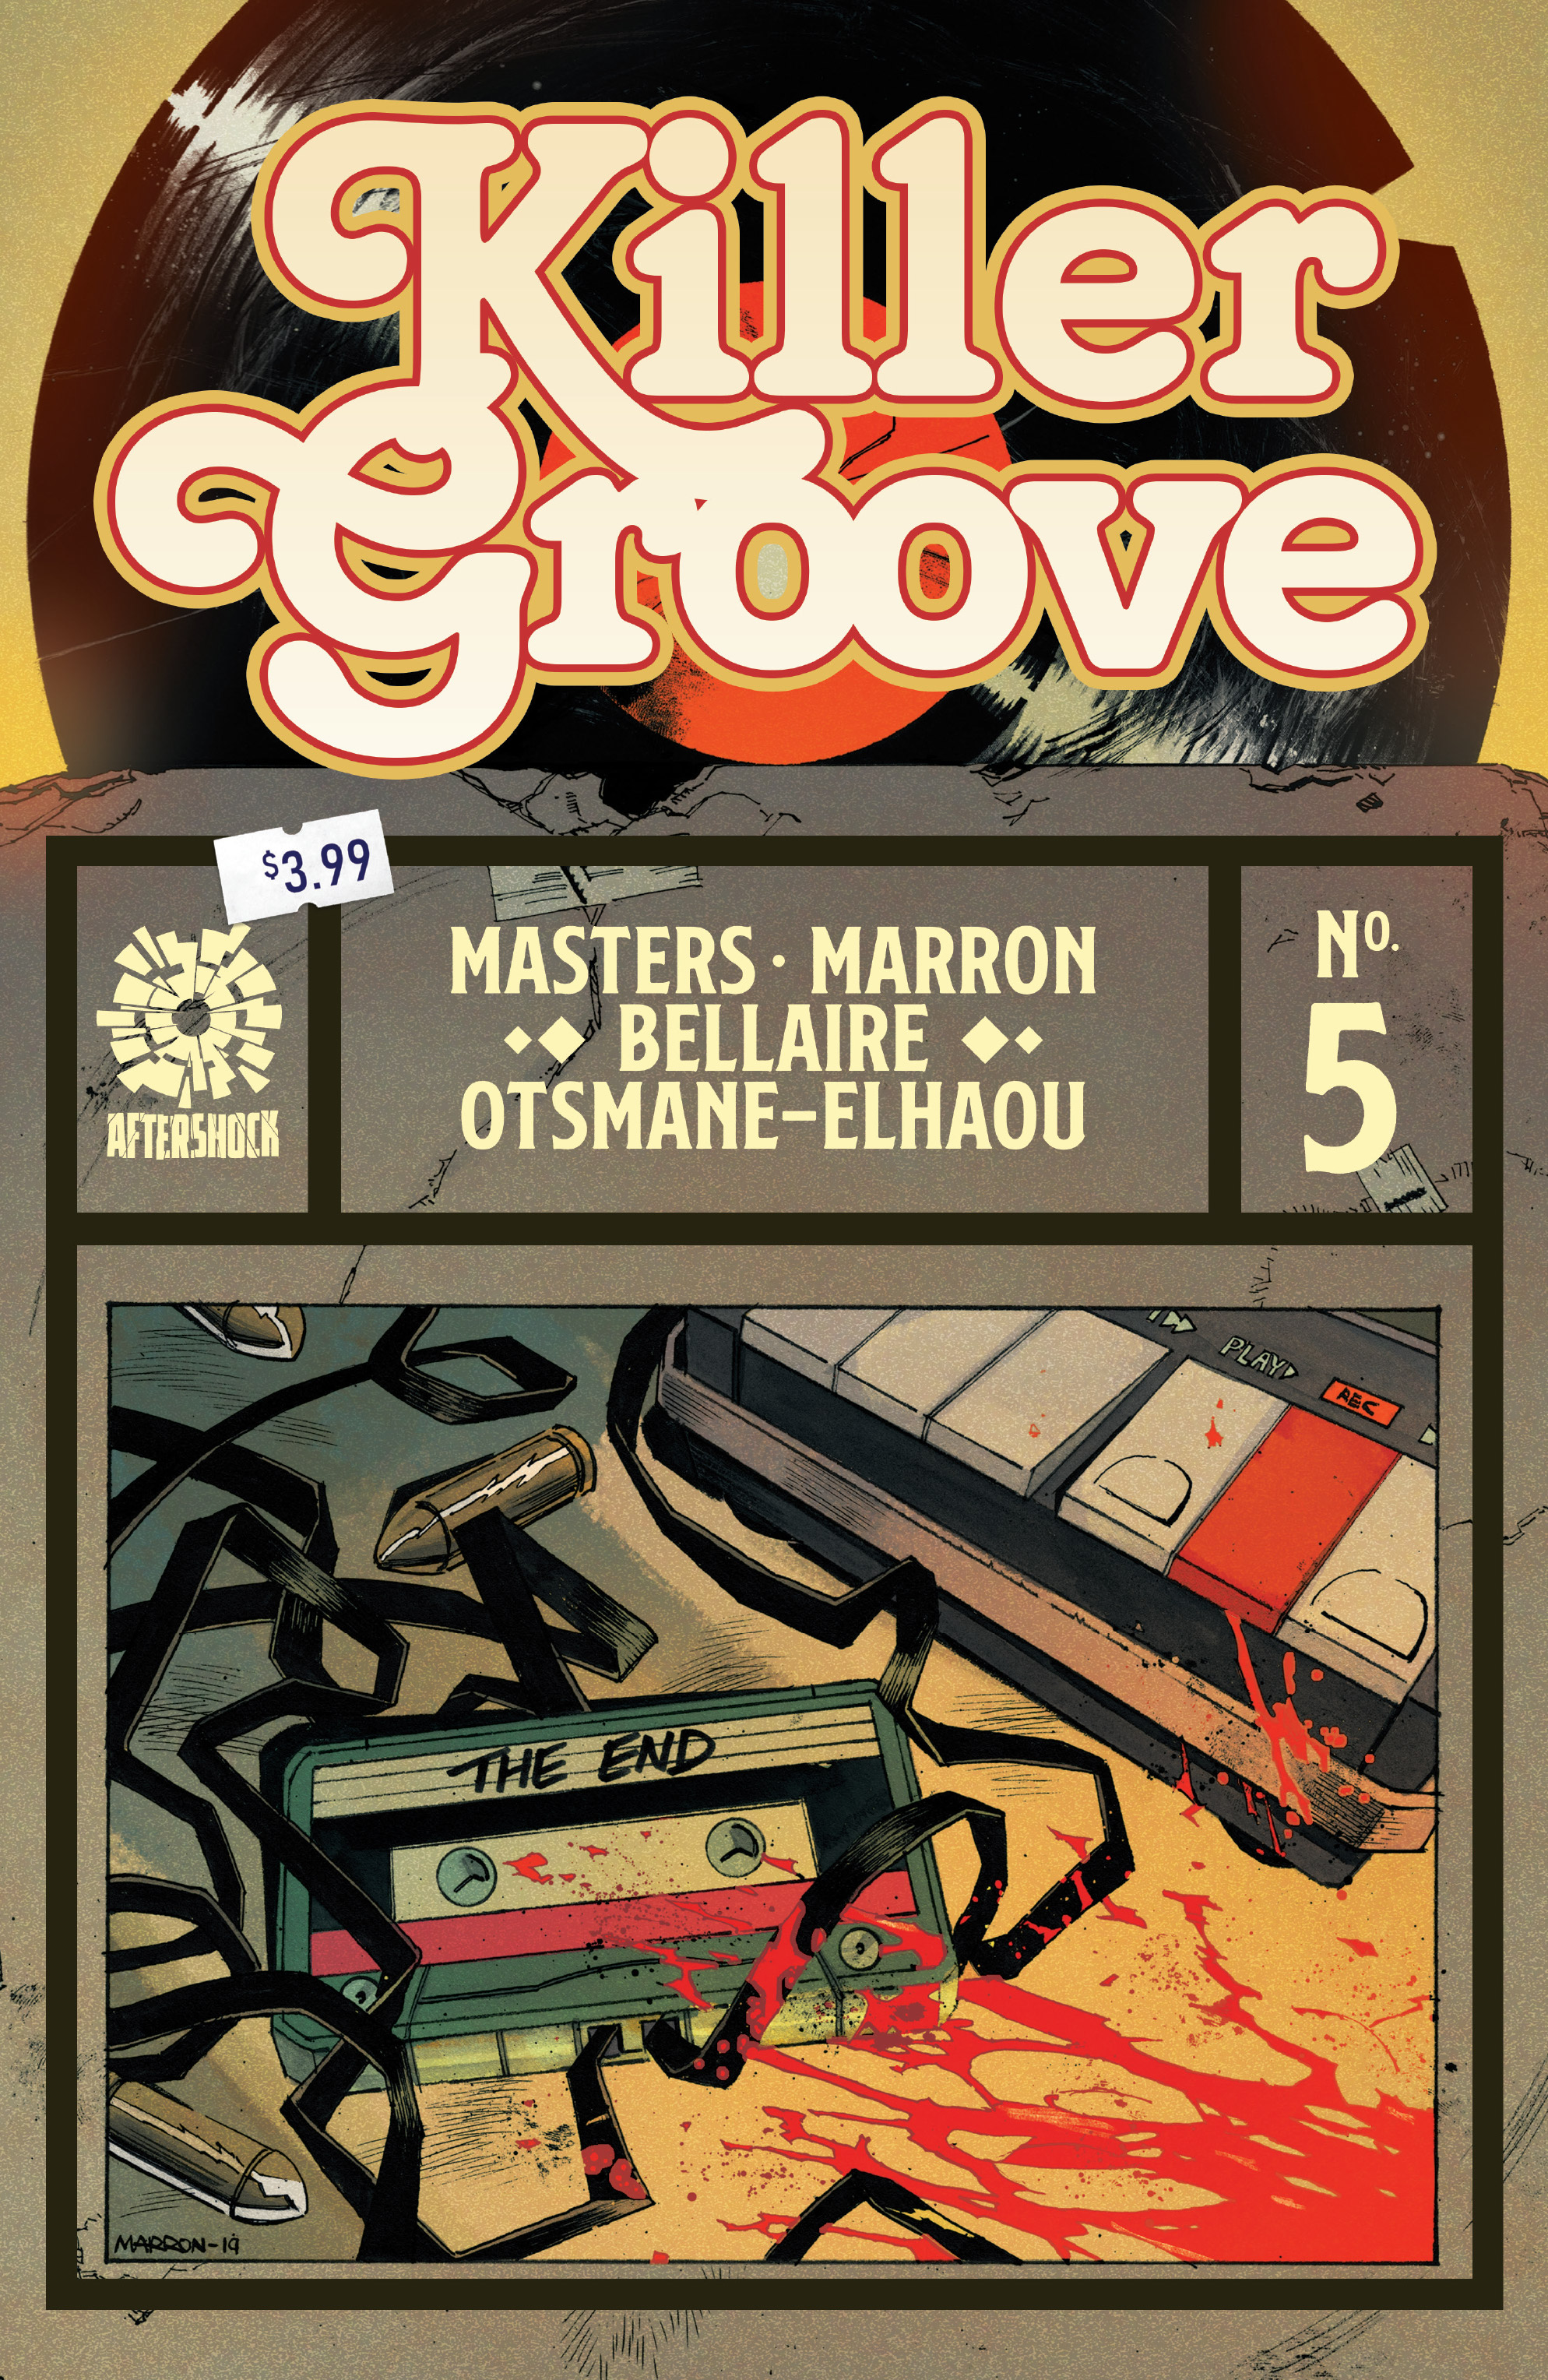 Read online Killer Groove comic -  Issue #5 - 1